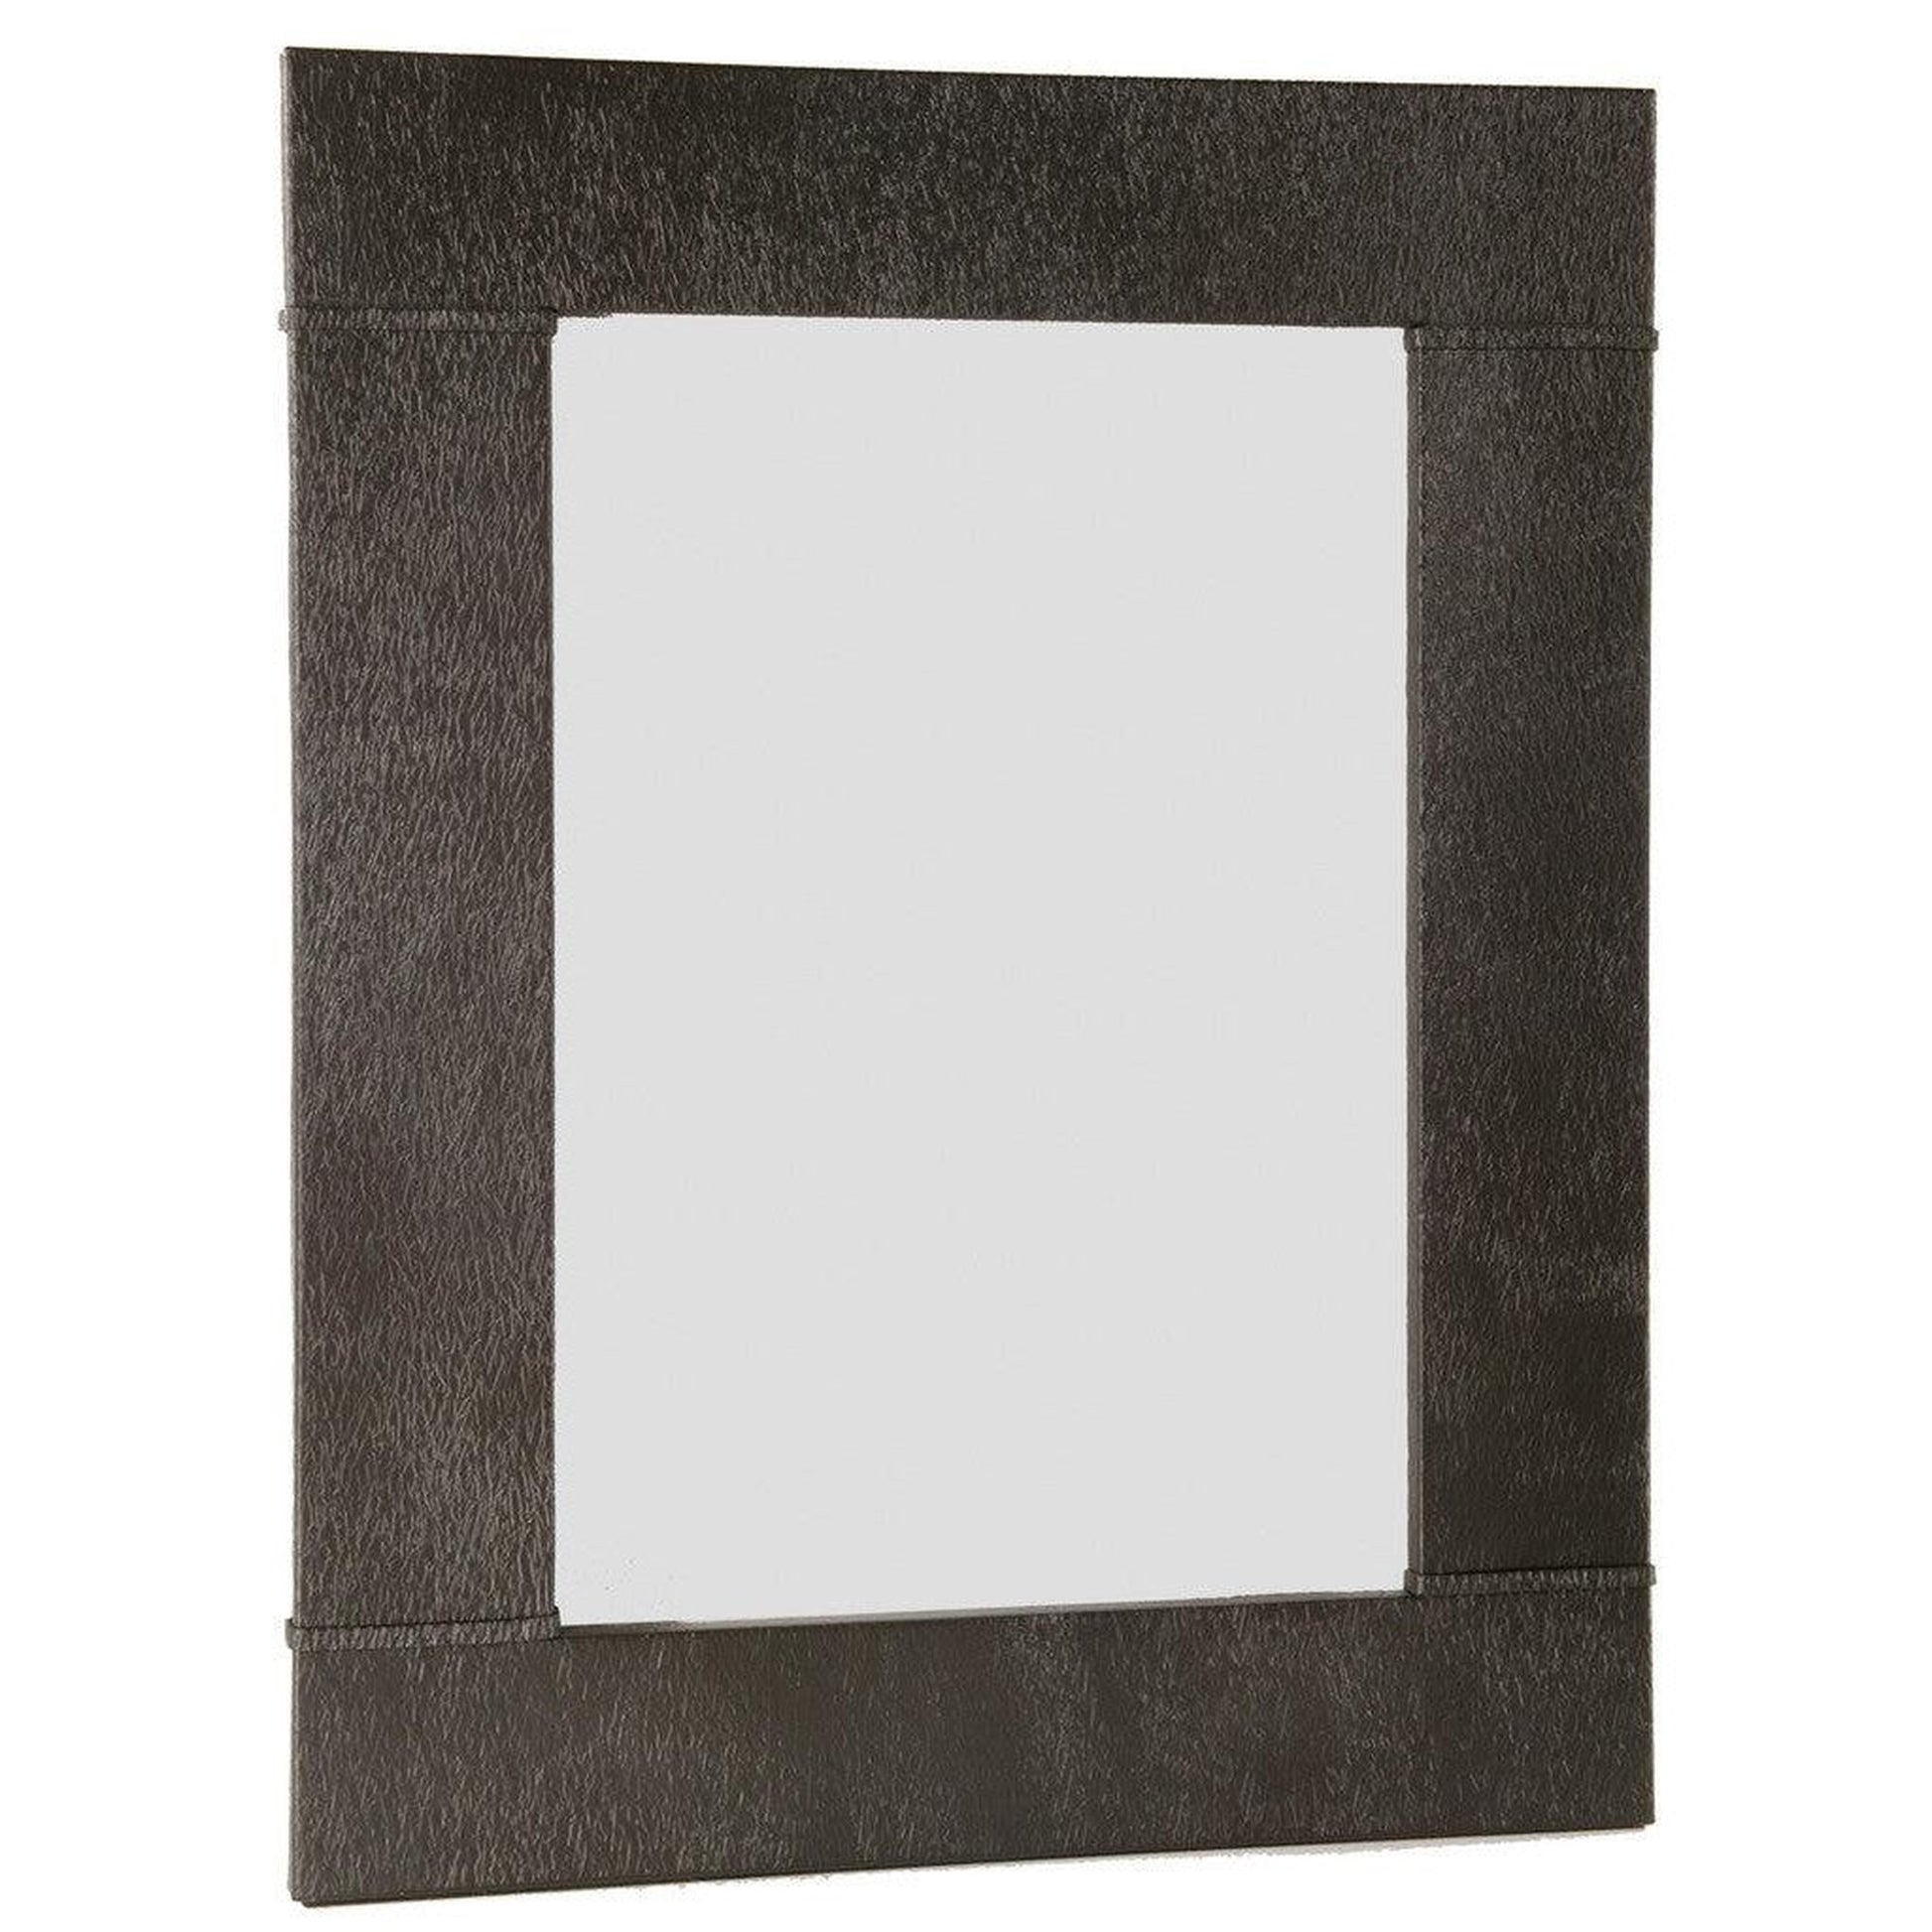 Stone County Ironworks Cedarvale 31" x 35" Small Chalk White Iron Wall Mirror With Copper Iron Accent